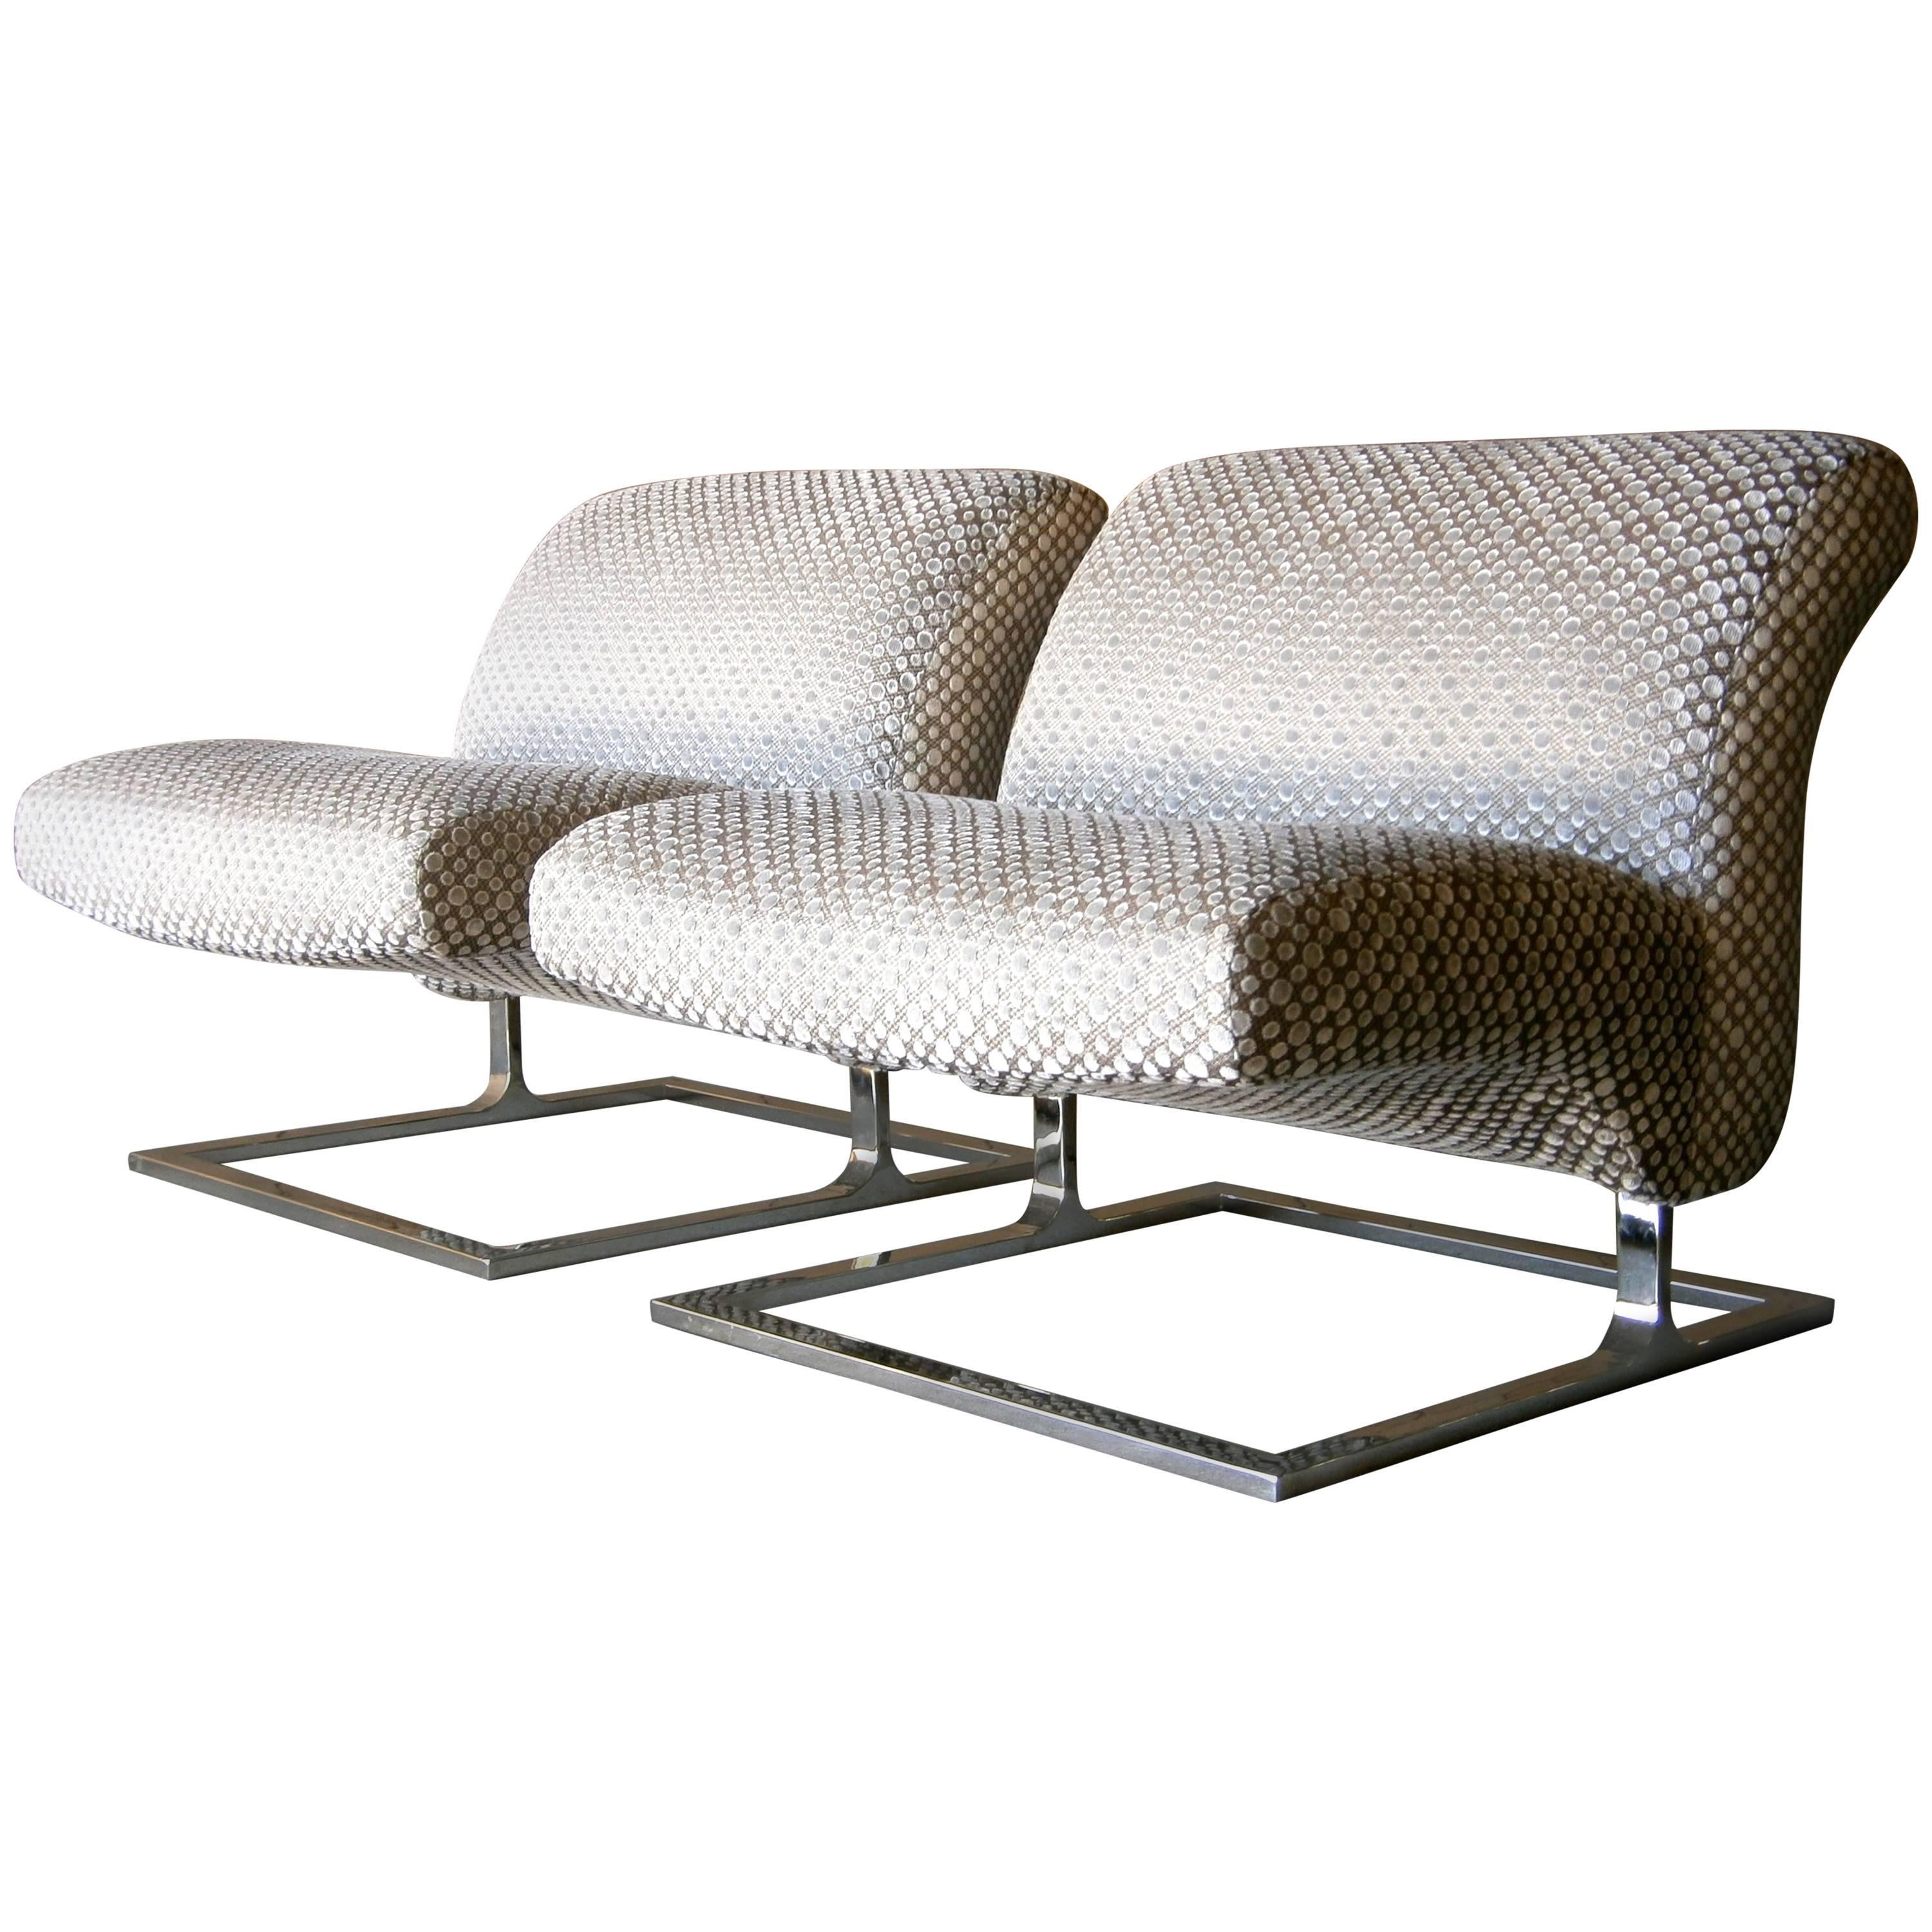 Handsome Pair of Cantilevered Lounge Chairs with Nickel Plated Bases C. 1970's